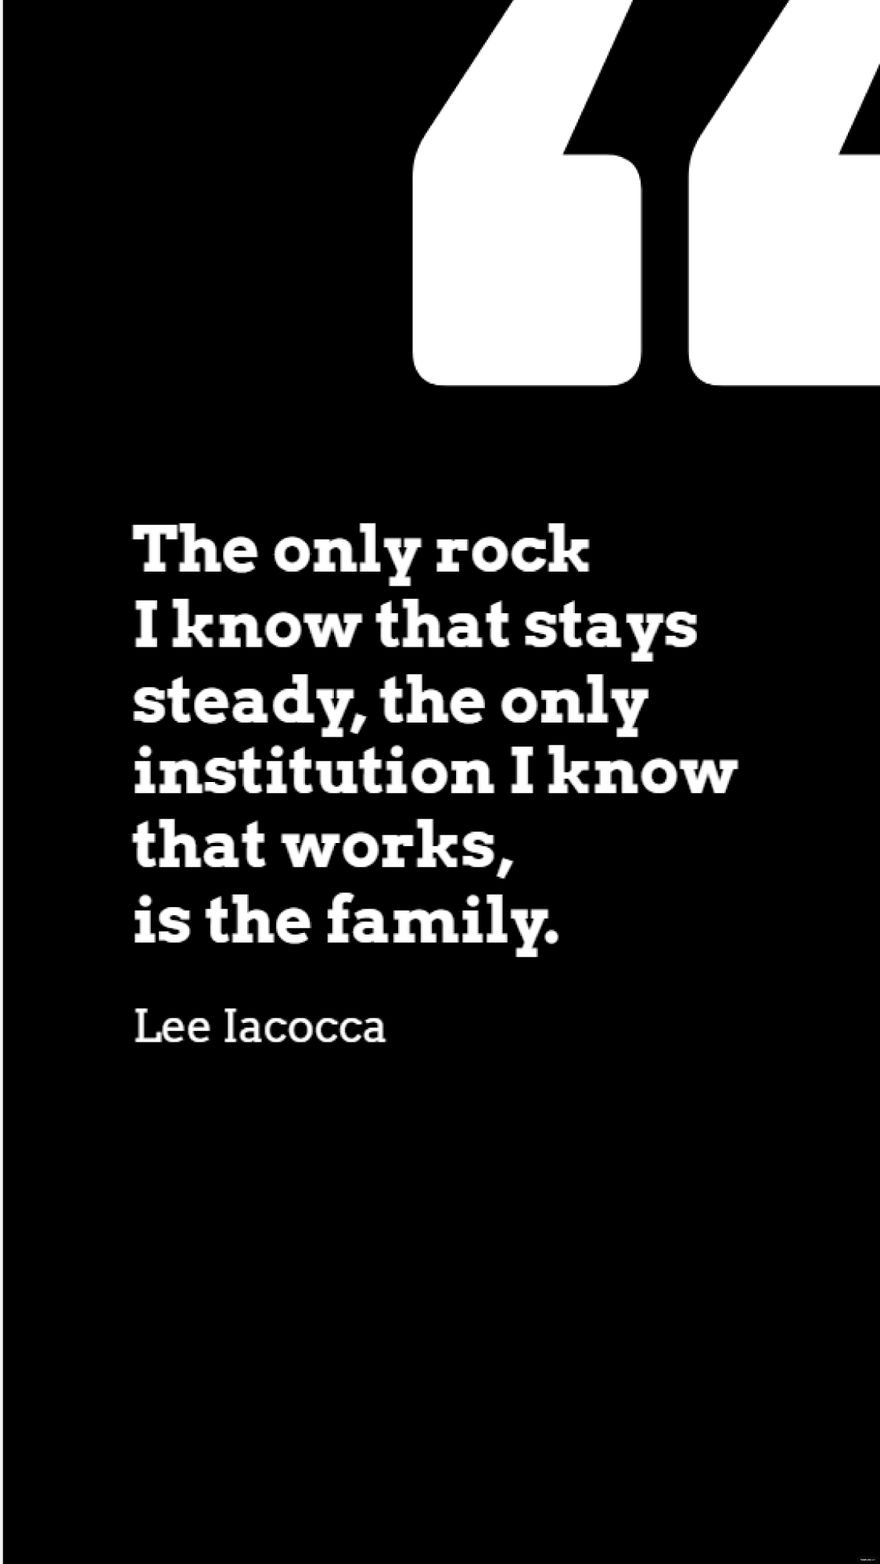 Lee Iacocca - The only rock I know that stays steady, the only institution I know that works, is the family. in JPG